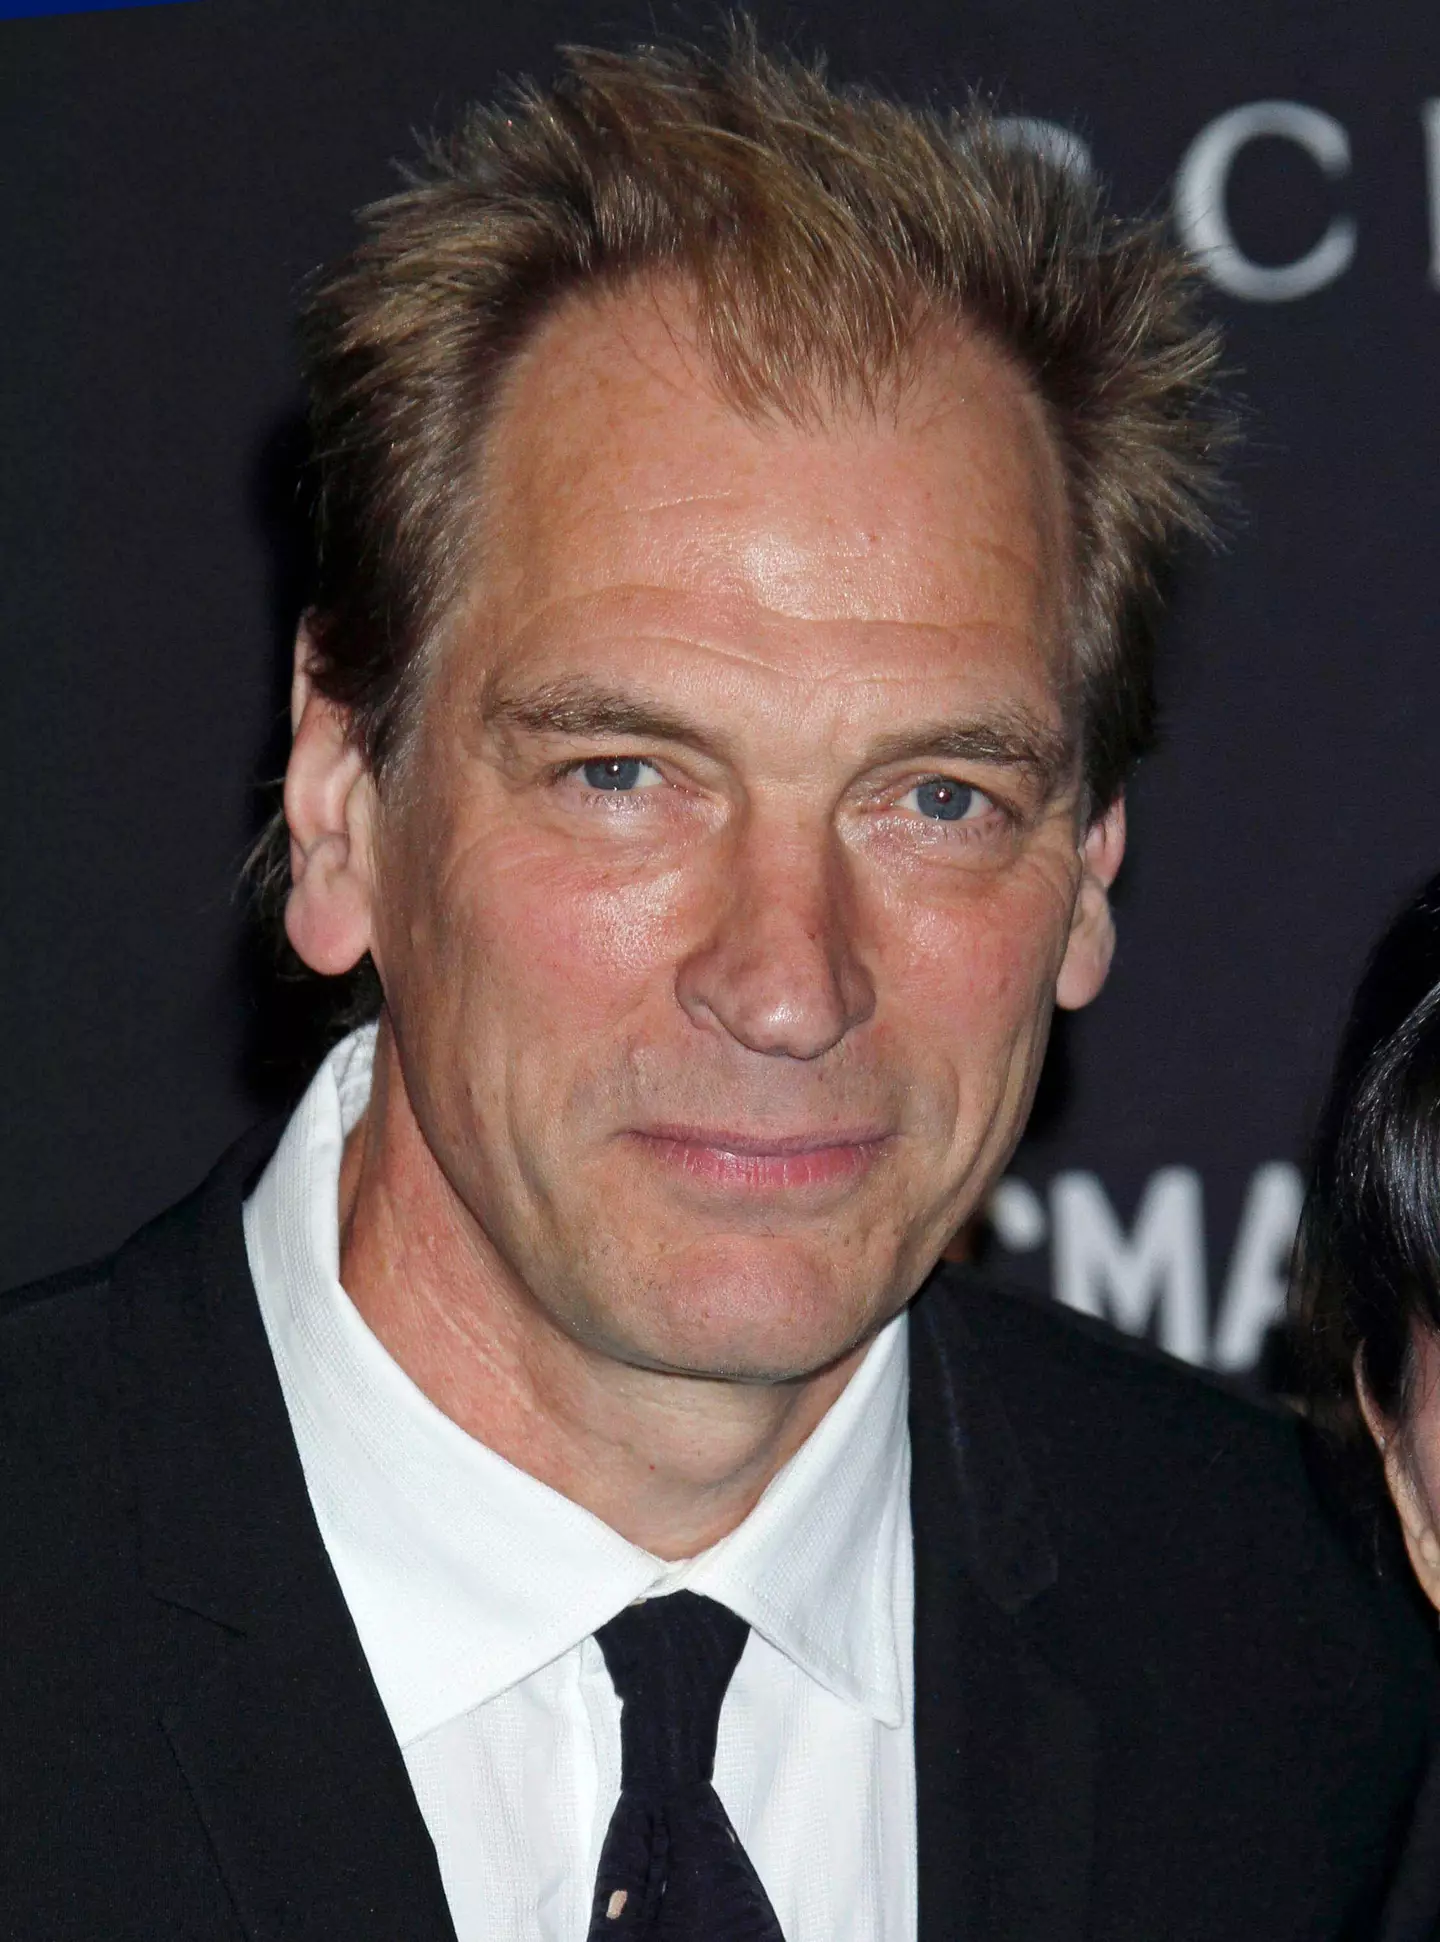 Julian Sands has been missing for around six months.